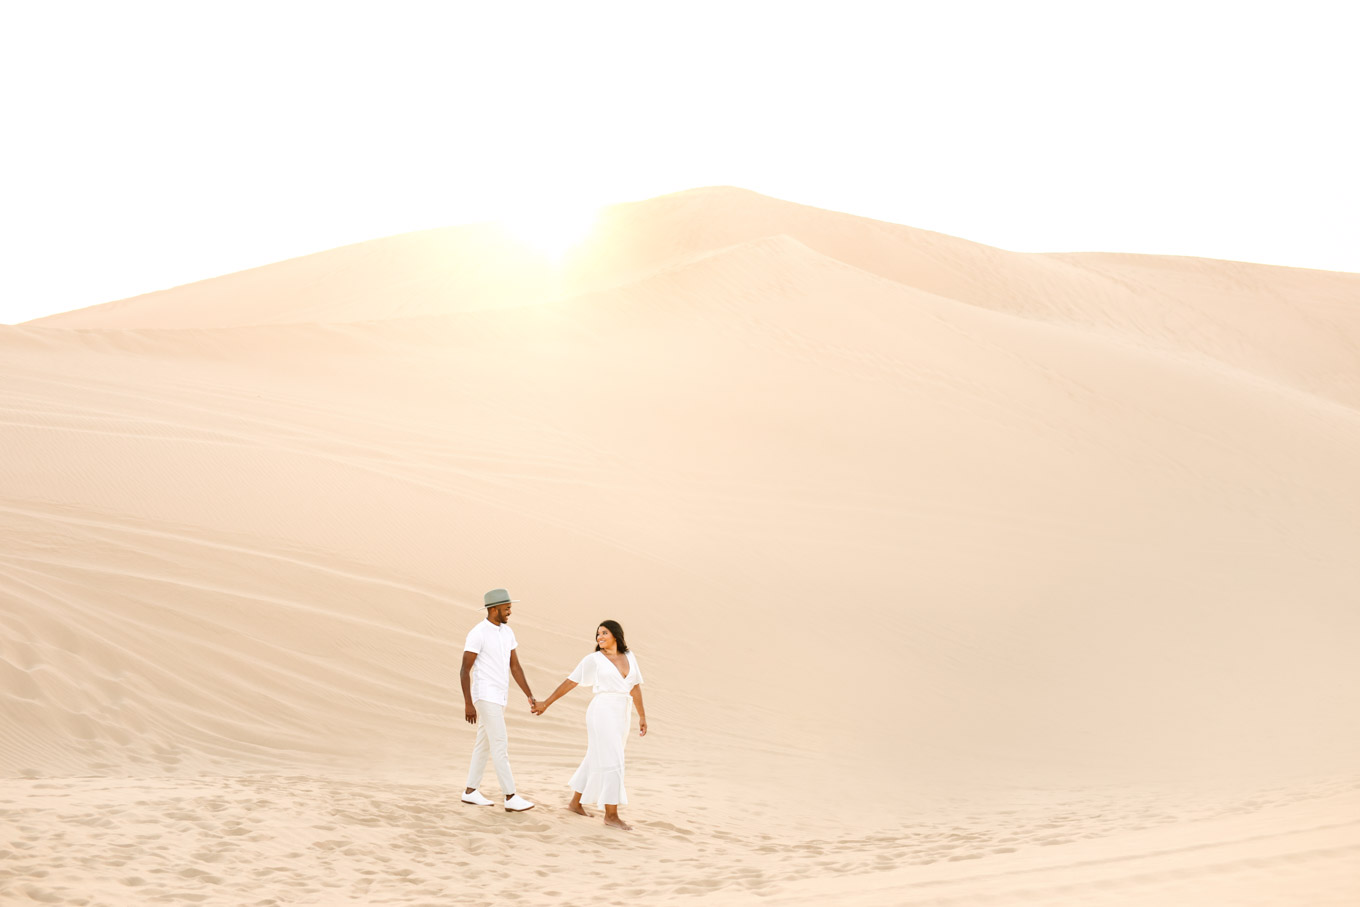 California Sand Dunes engagement session | Colorful Palm Springs wedding photography | #palmspringsphotographer #sanddunes #engagementsession #southerncalifornia  Source: Mary Costa Photography | Los Angeles